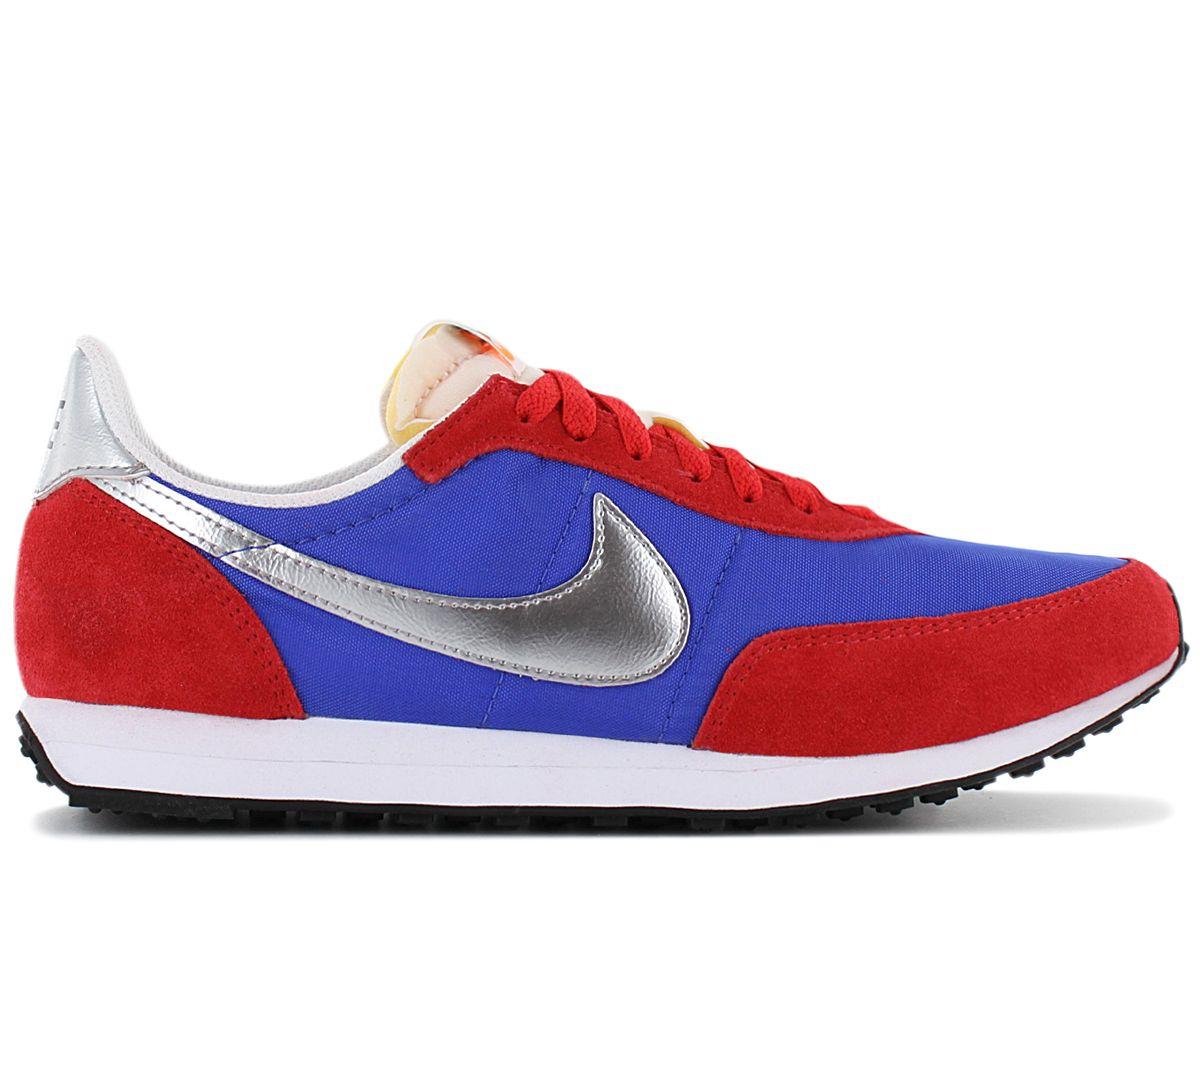 Nike Waffle Trainer 2 SP - Mens Shoes Blue-Red DC2646-400 Sneakers Sport Shoes ORIGINAL